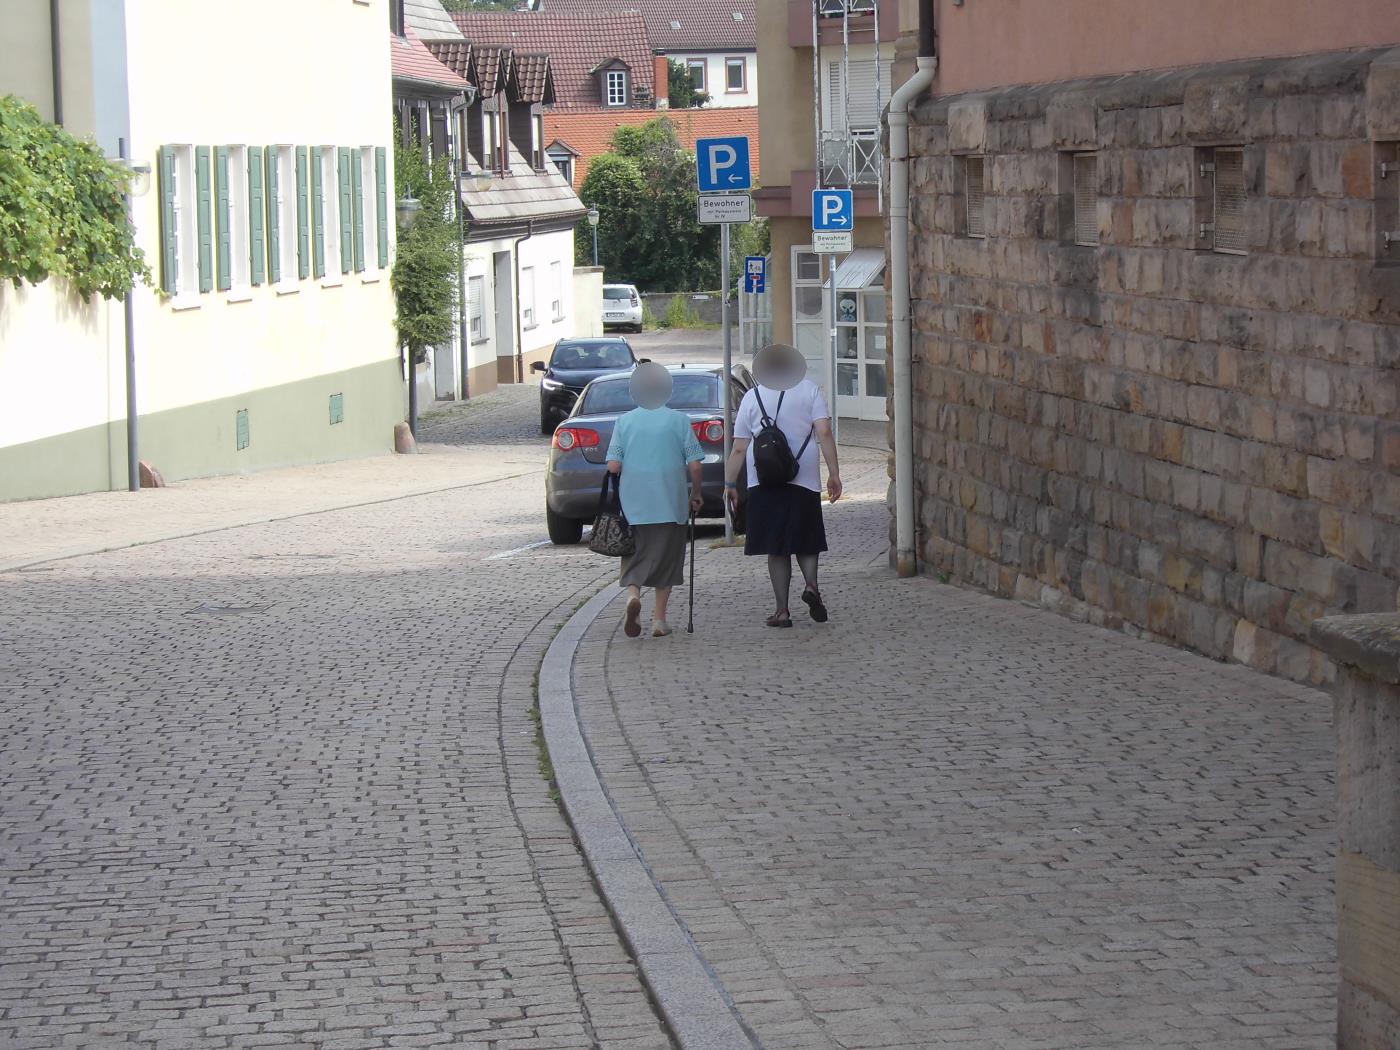 Two Jehovah's activists in Speyer, then.